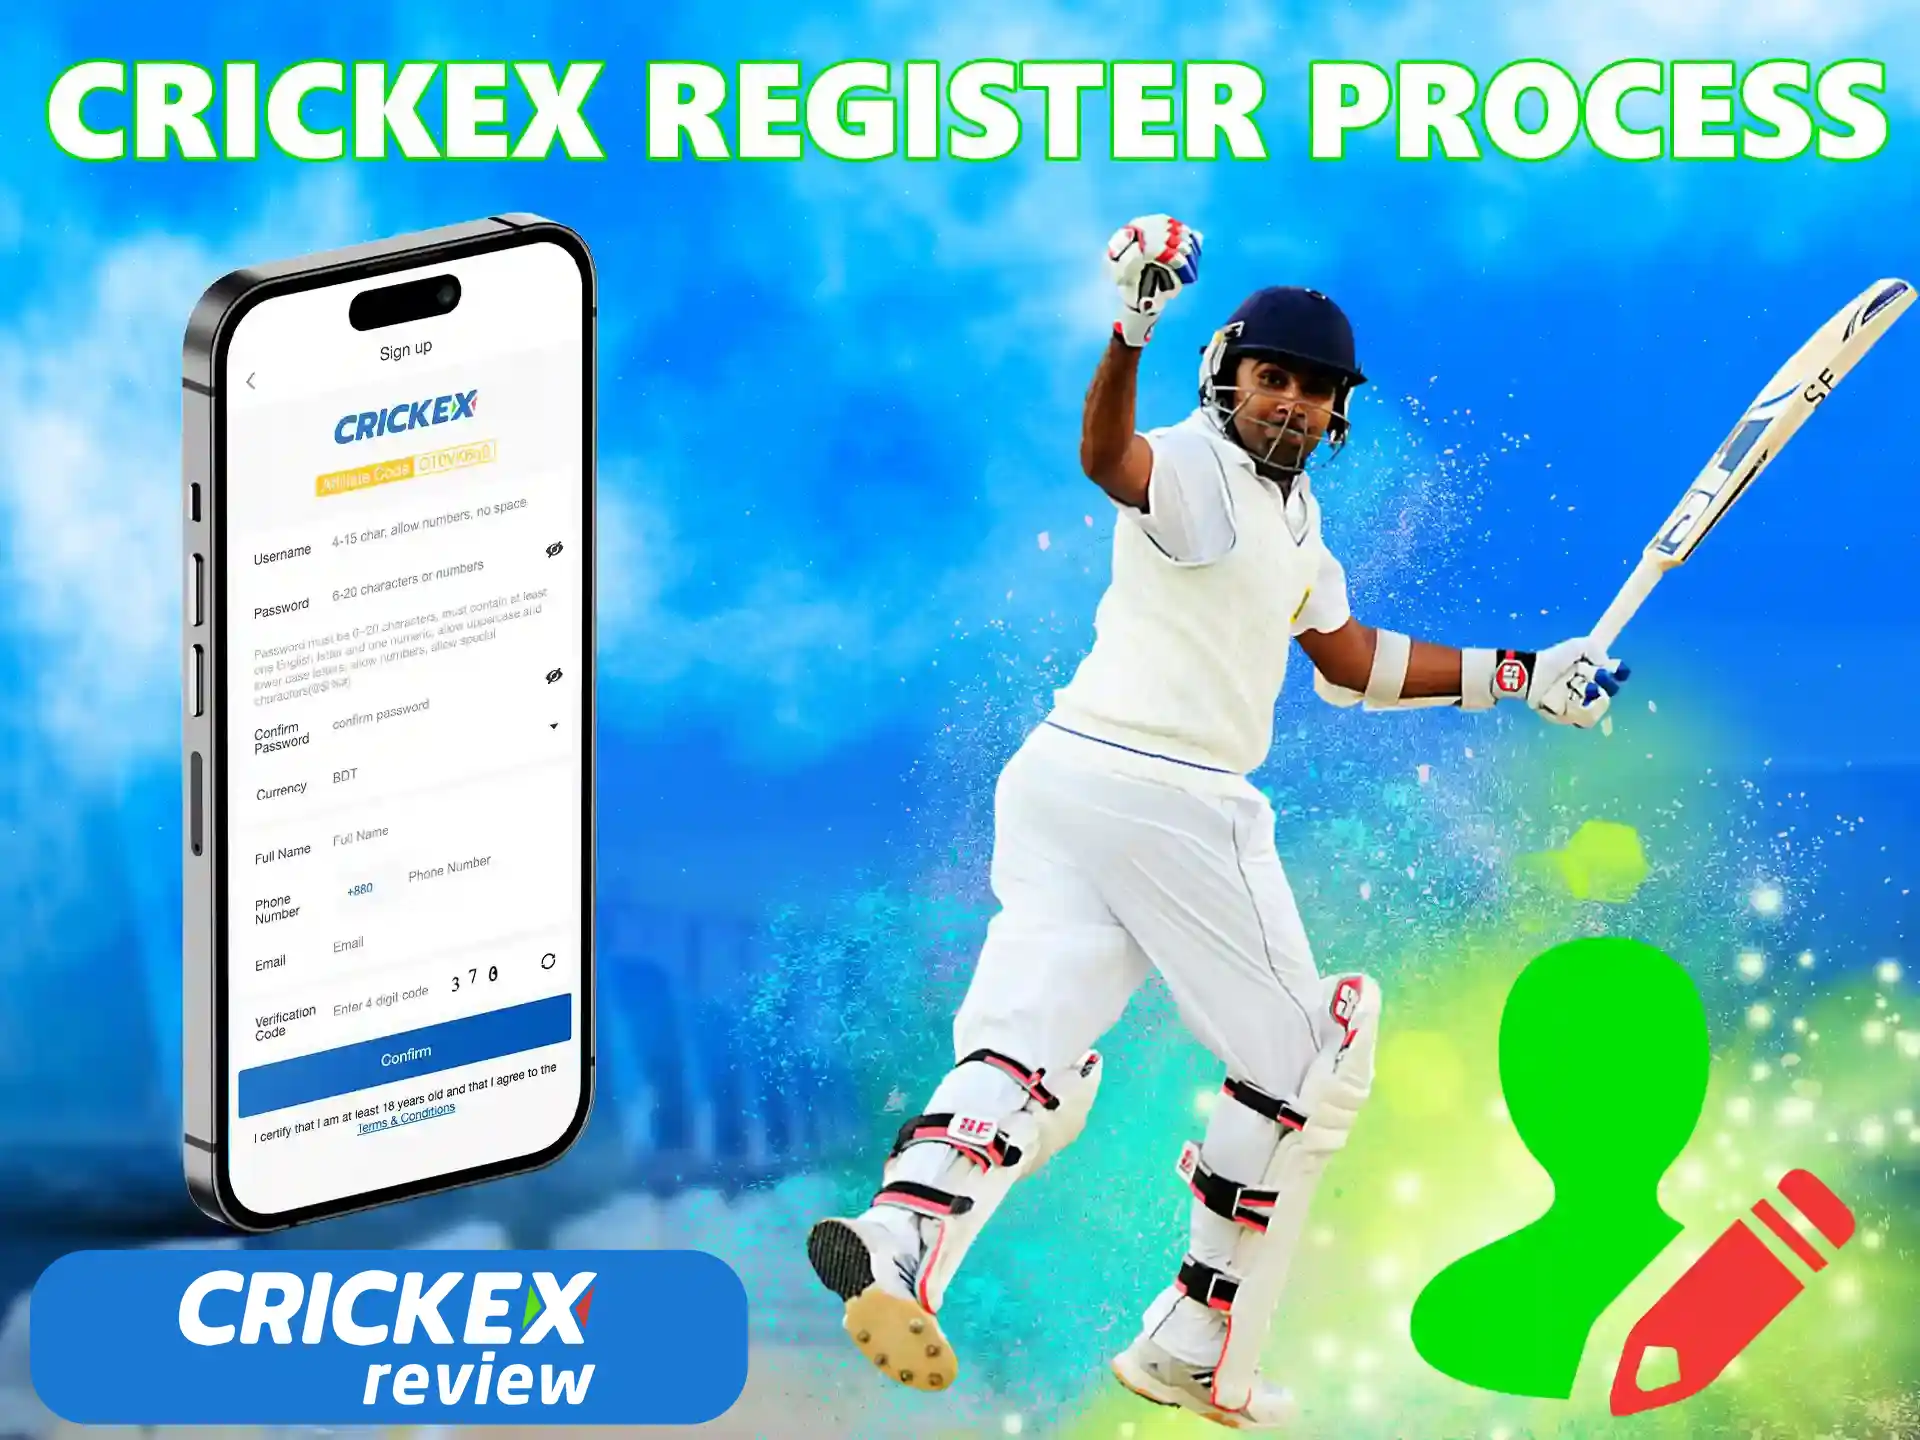 Open the registration form on the Crickex website.